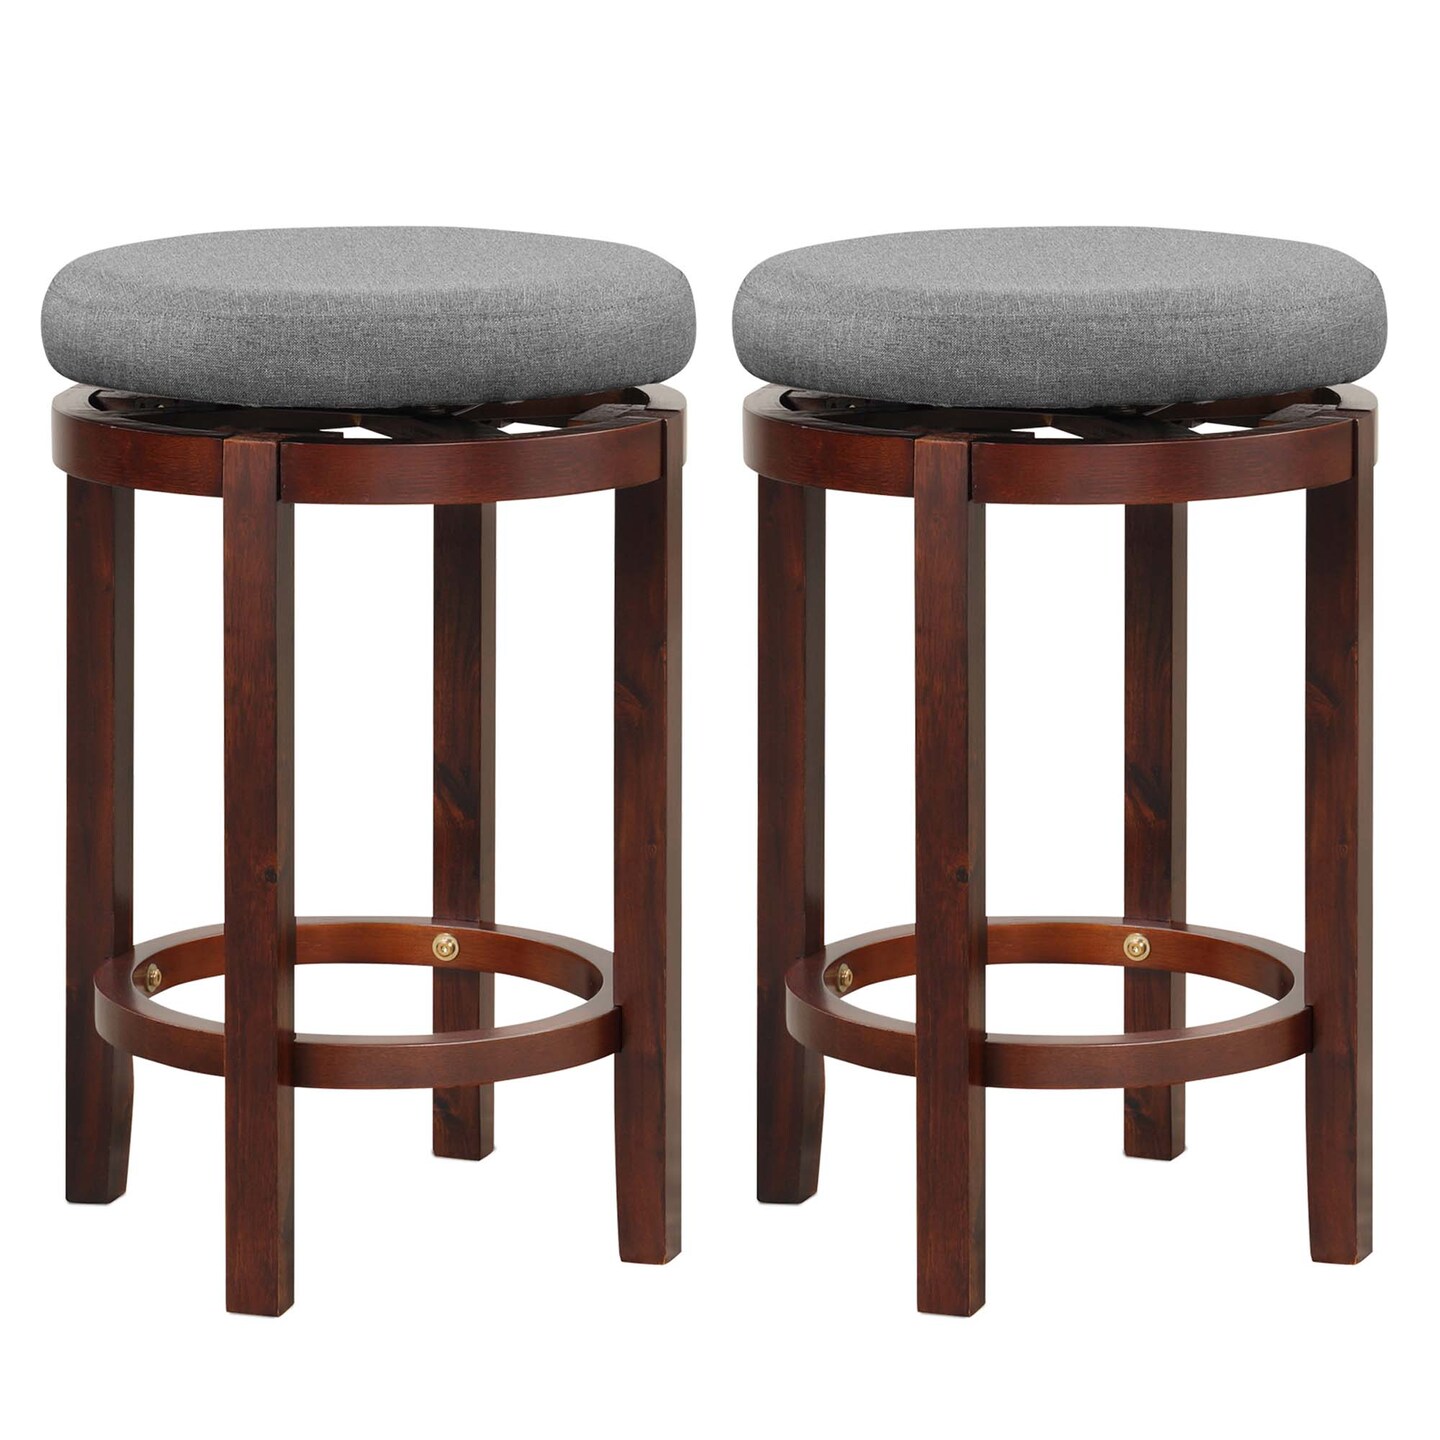 Costway Set of 2 Upholstered Swivel Round Bar Stools 26&#x27;&#x27; Wooden Pub Kitchen Chairs Gray